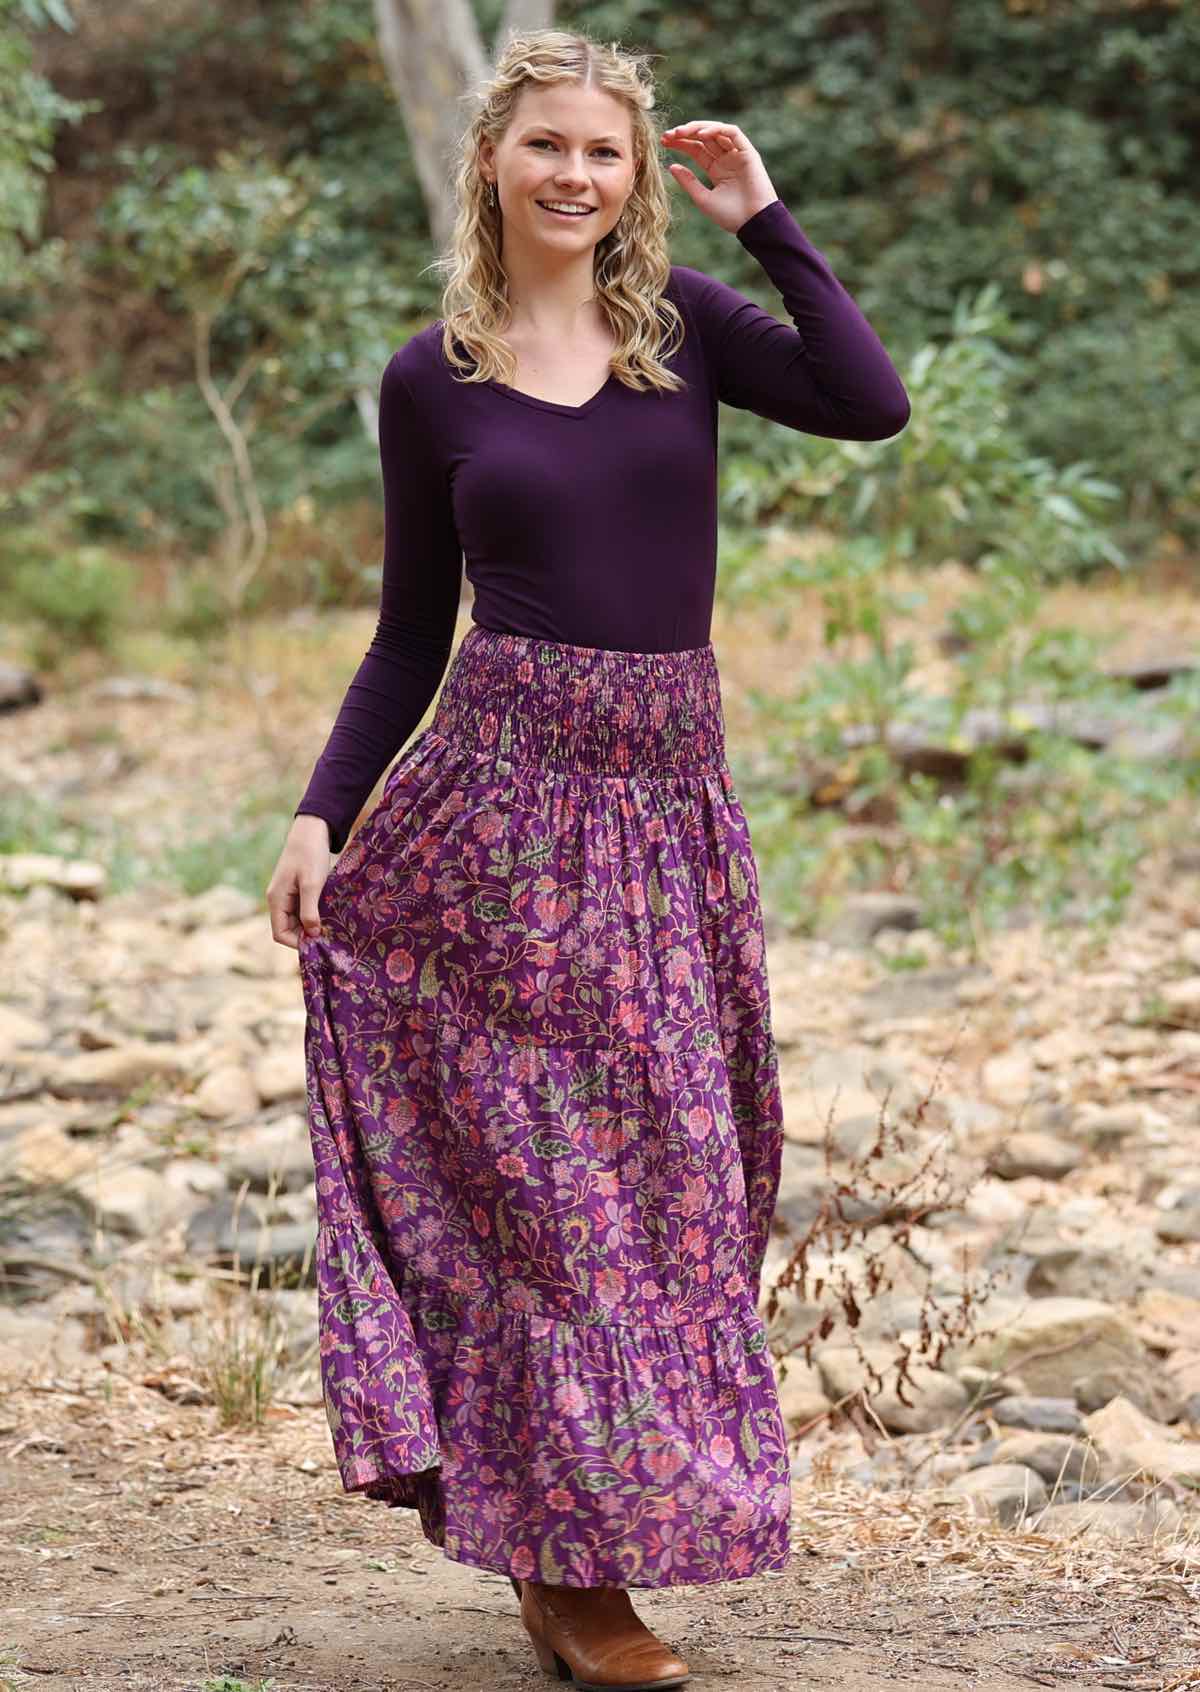 Float through your day in this super comfortable cotton maxi skirt